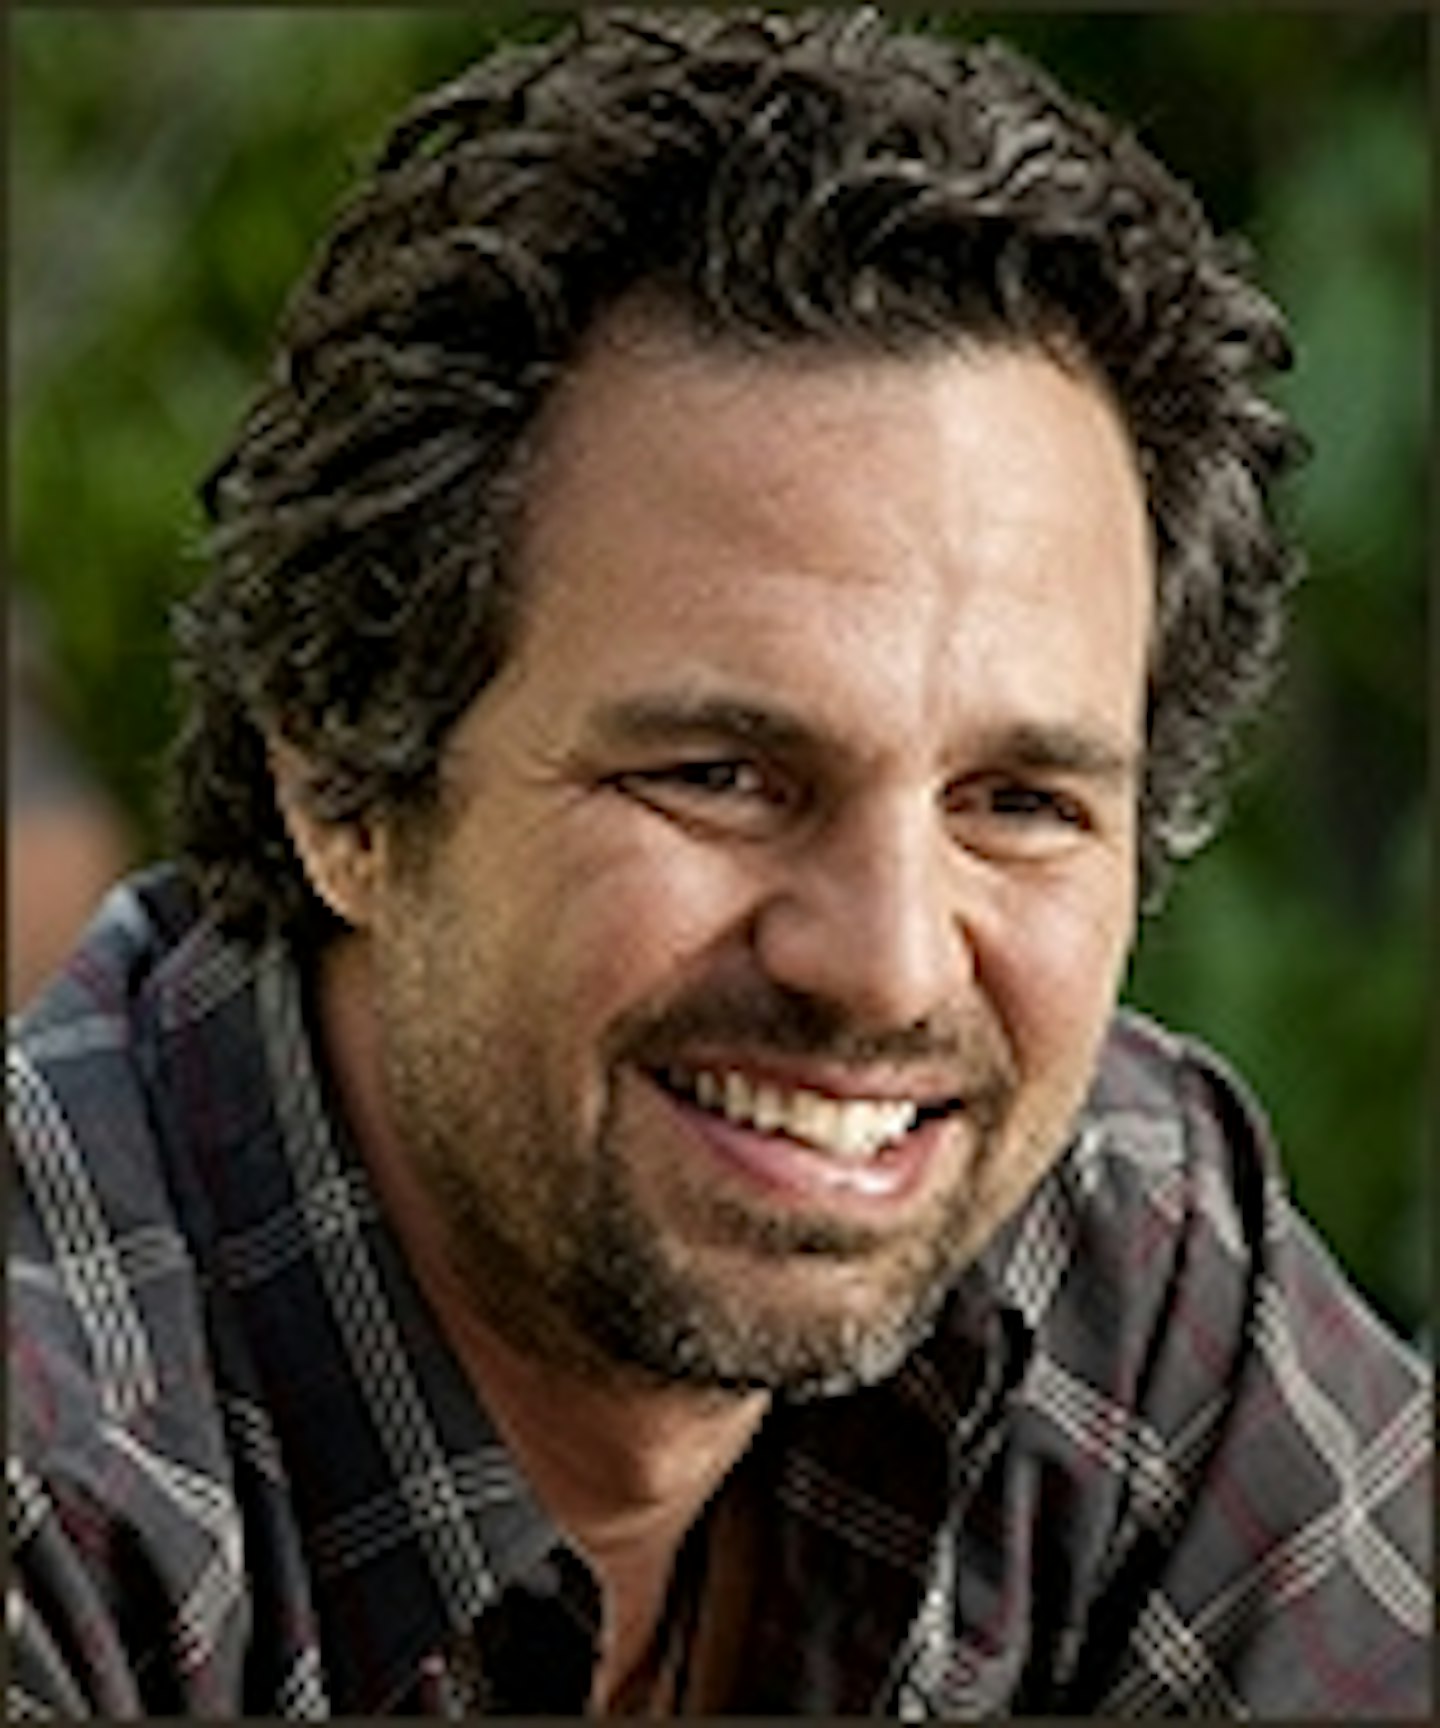 Ruffalo Asks Can A Song Save Your Life?